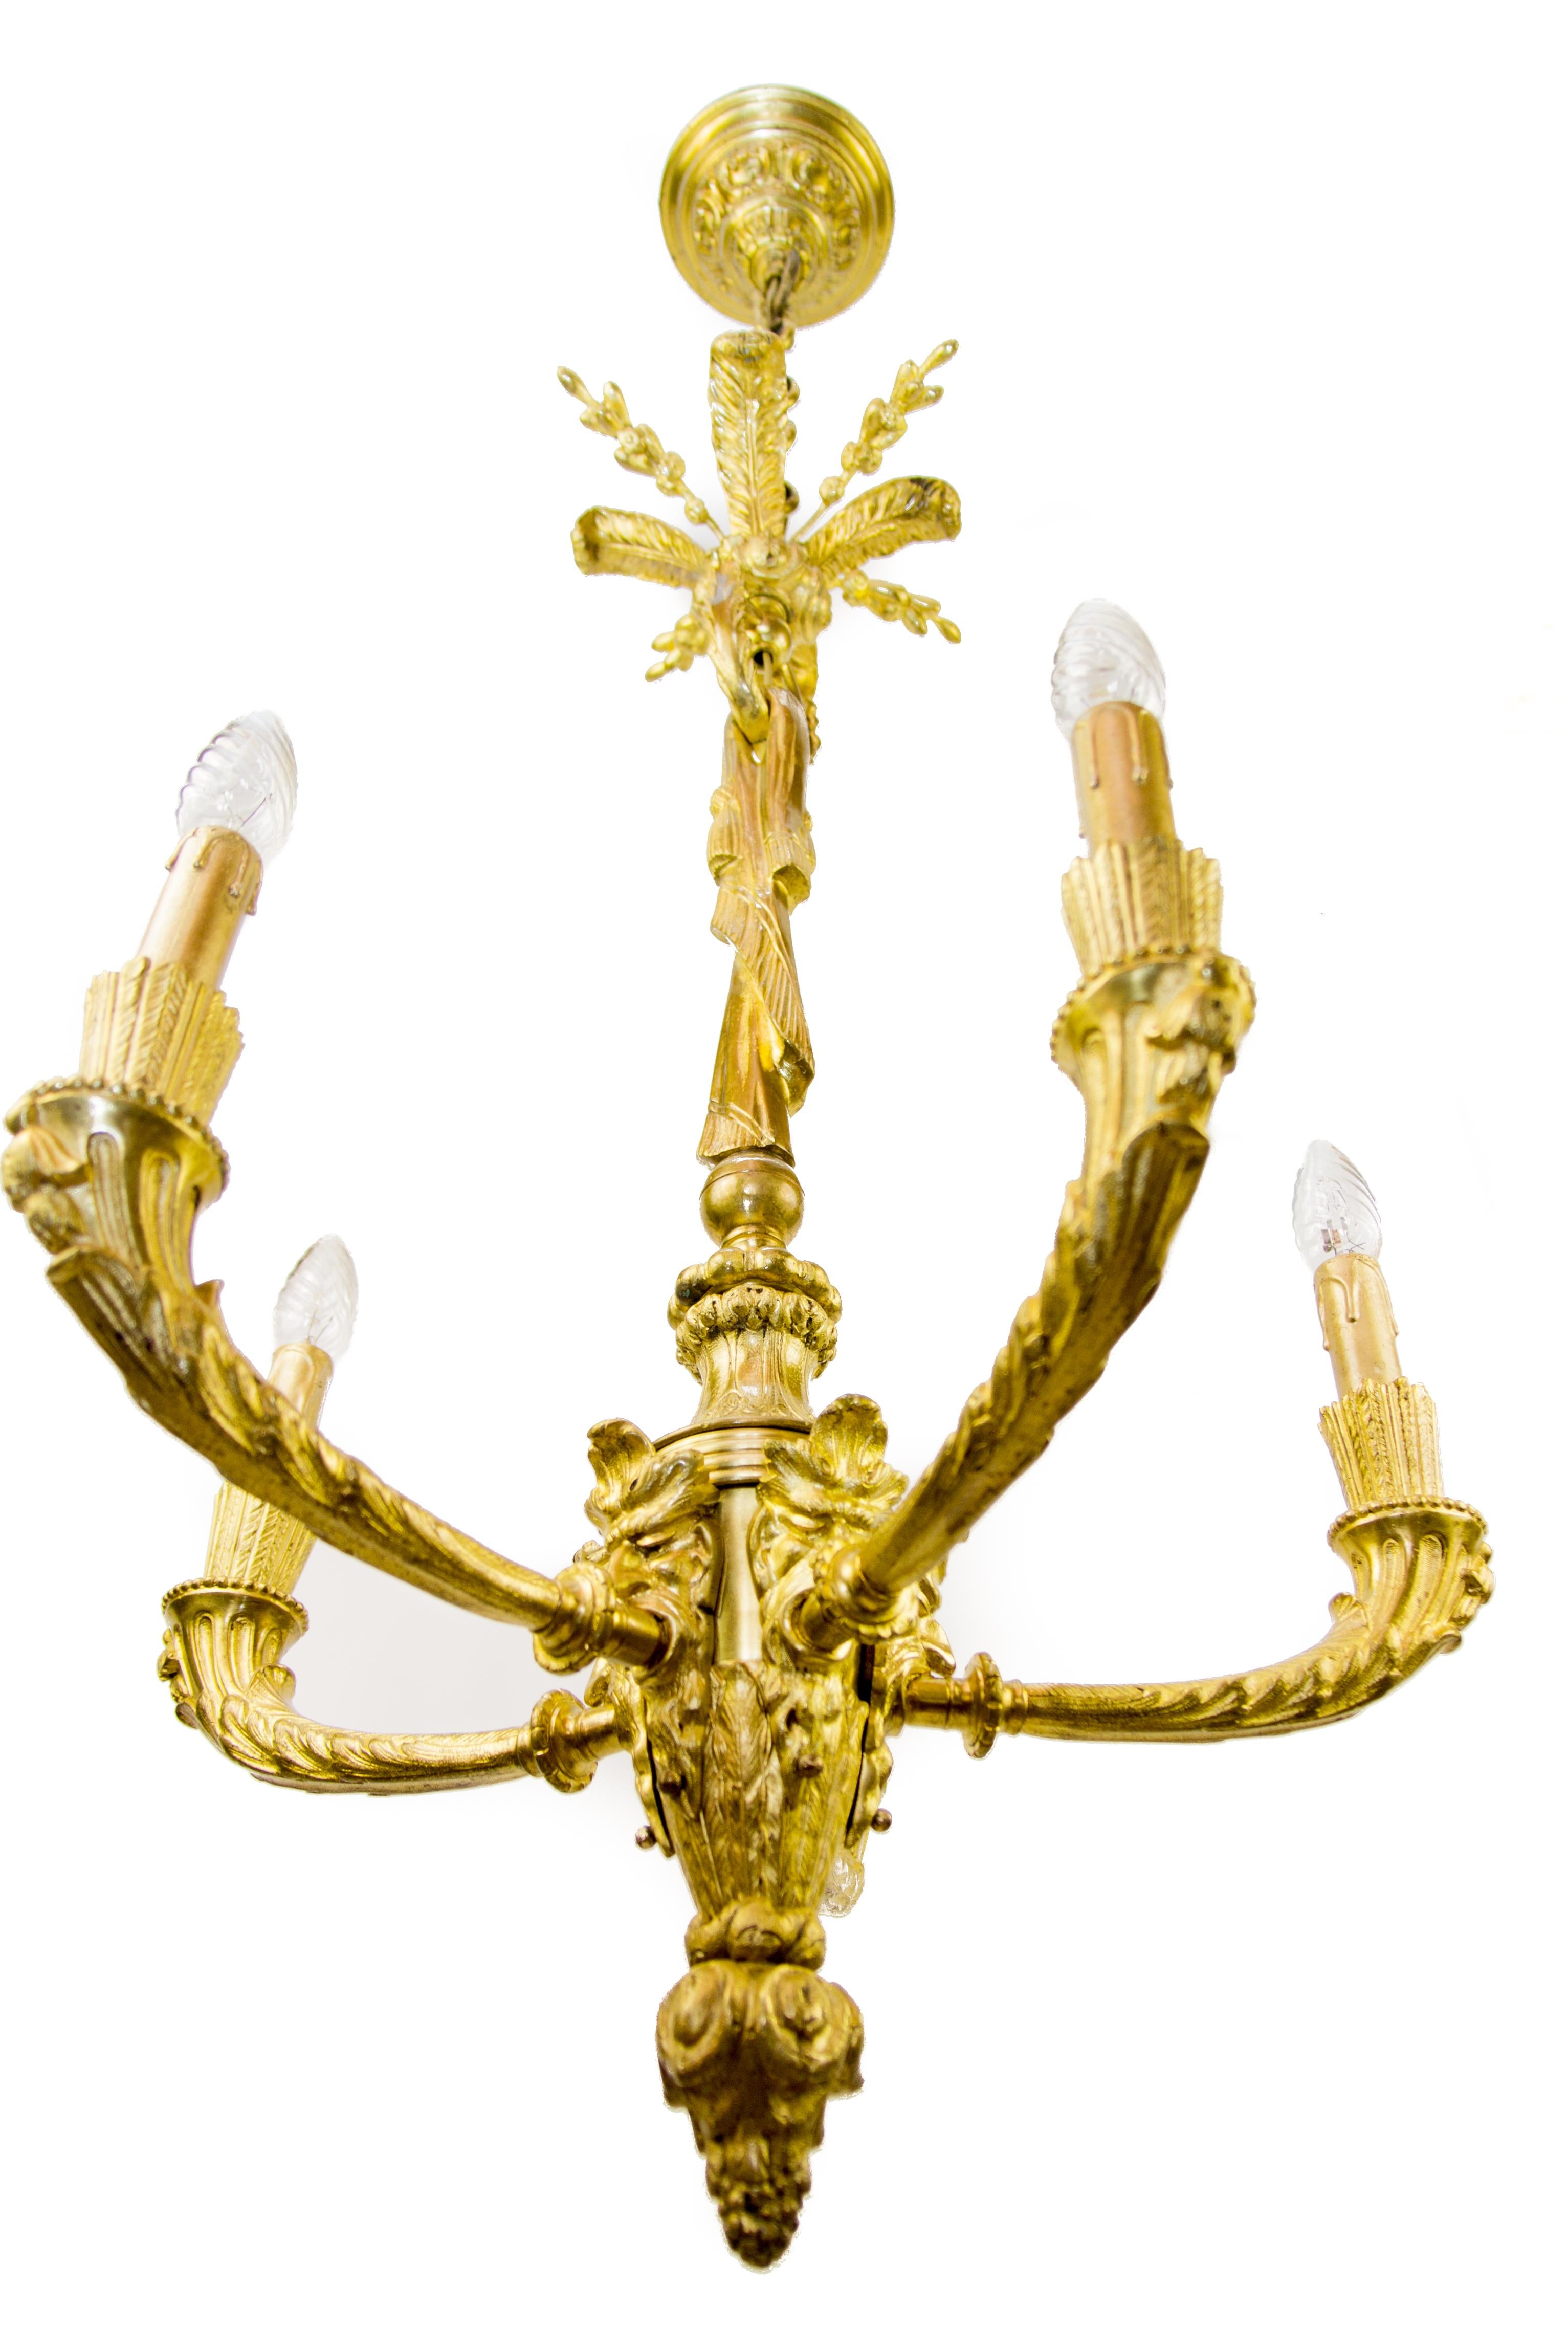 Elegant French Louis XVI style gilt bronze five – light electrified chandelier from the late 19th century, decorated with Bacchus heads and foliate motifs.
Five bronze arms with E14 sockets and new wiring, new red fabric lampshades.
Free delivery in